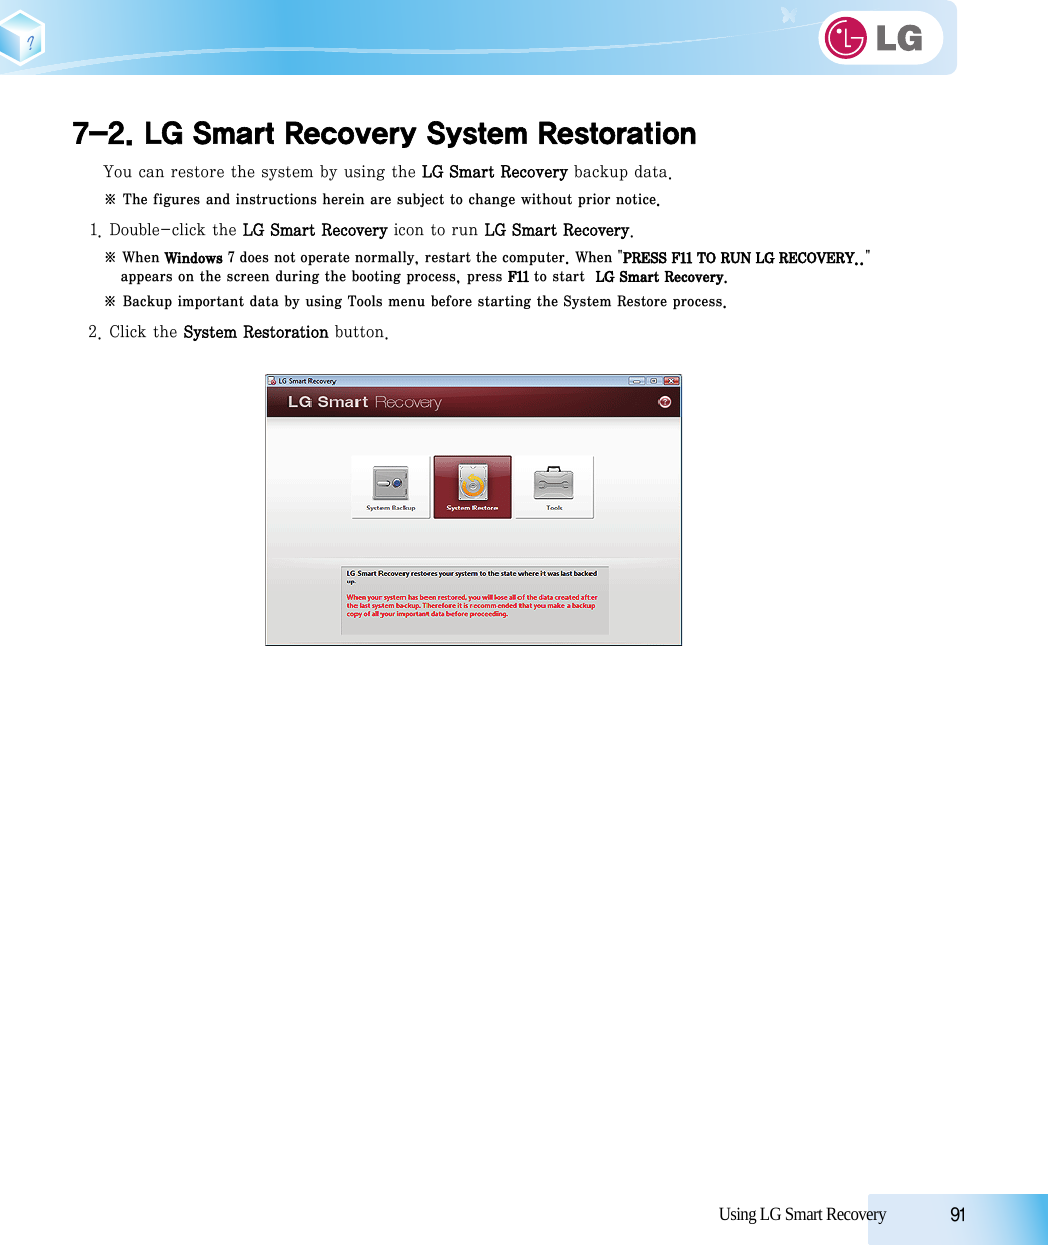 Using LG Smart Recovery            917-2. LG Smart Recovery System RestorationYou can restore the system by using the LG Smart Recovery backup data.※ The figures and instructions herein are subject to change without prior notice.1. Double-click the LG Smart Recovery icon to run LG Smart Recovery.※ When Windows 7 does not operate normally, restart the computer. When &quot;PRESS F11 TO RUN LG RECOVERY..&quot;appears on the screen during the booting process, press F11 to start  LG Smart Recovery. ※ Backup important data by using Tools menu before starting the System Restore process. 2. Click the System Restoration button.